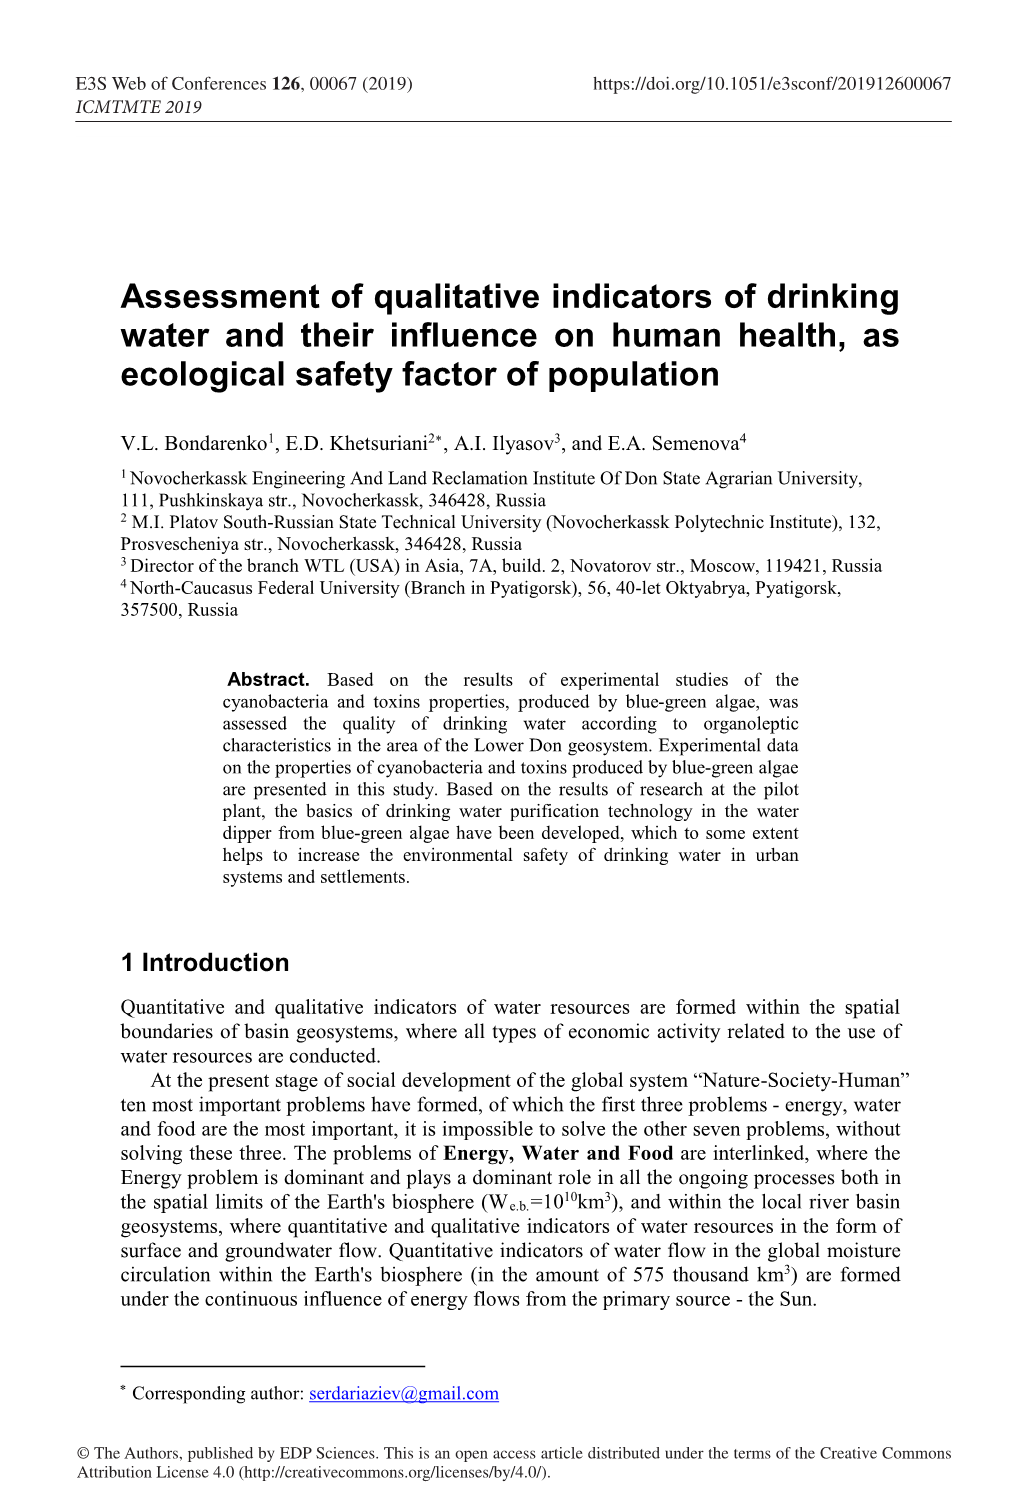 Assessment of Qualitative Indicators of Drinking Water and Their Influence on Human Health, As Ecological Safety Factor of Population